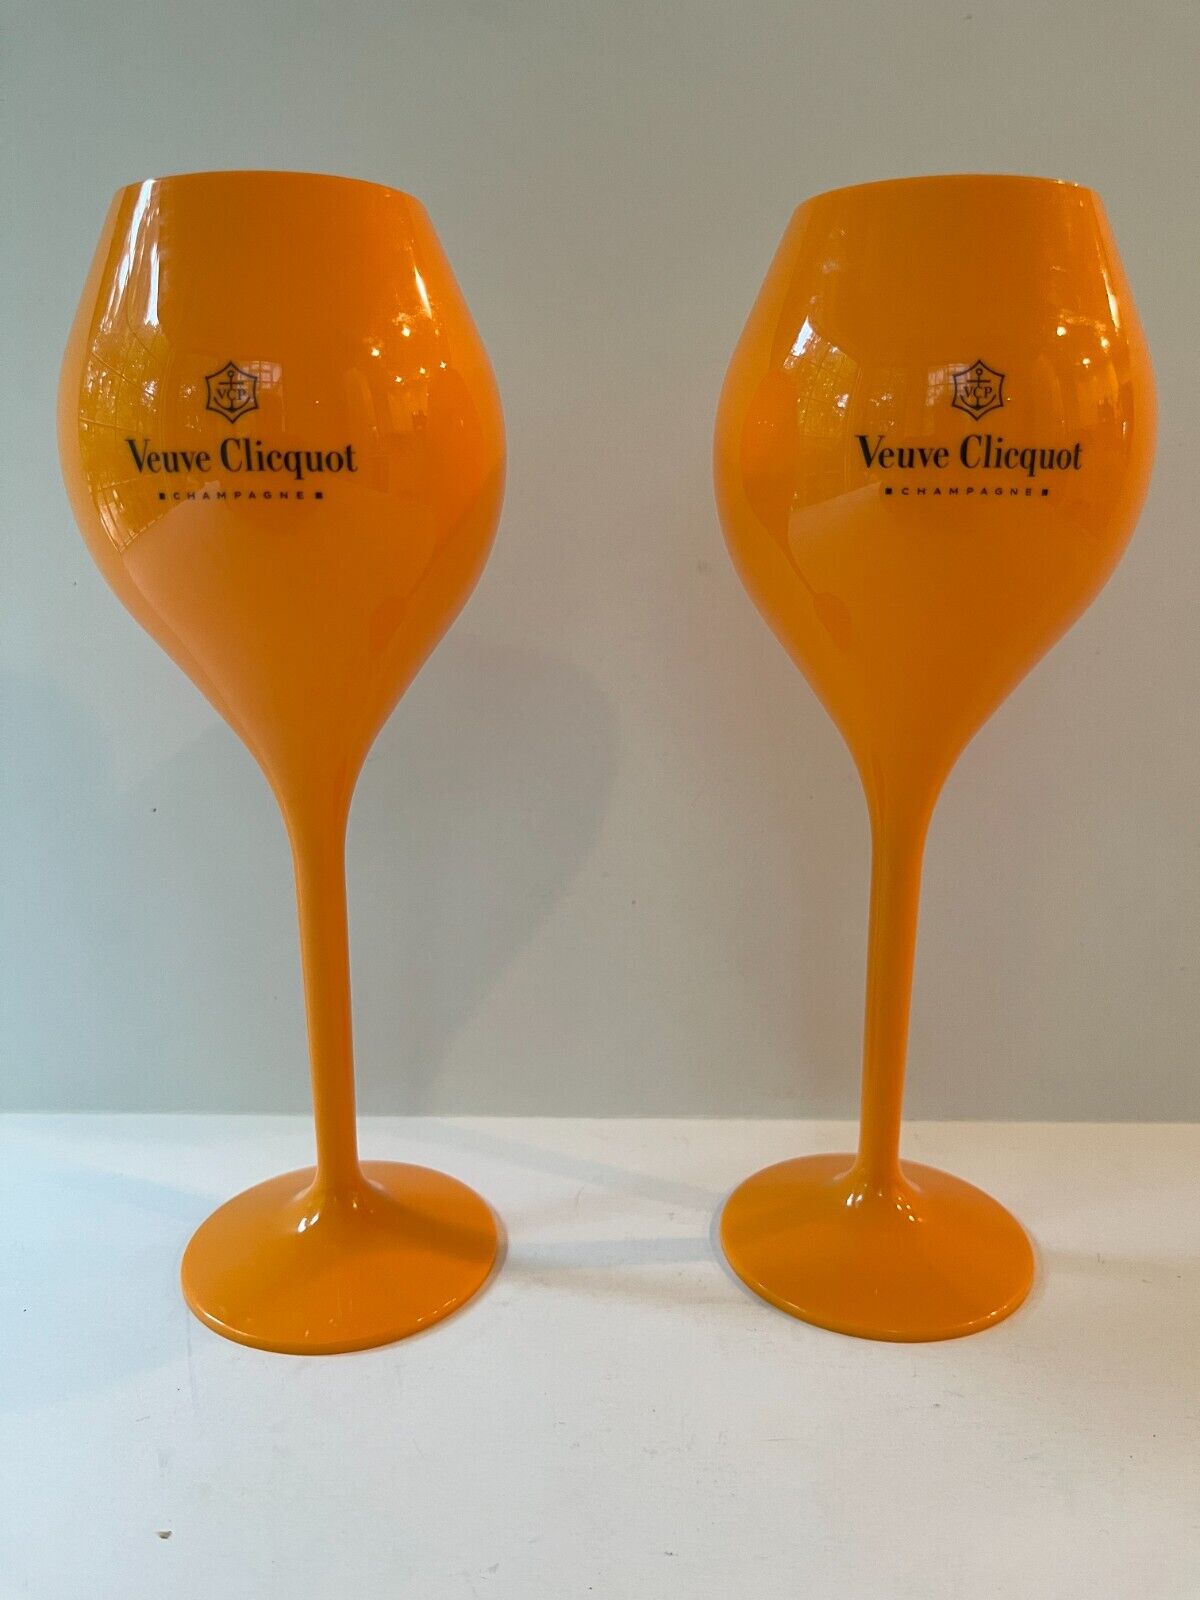 Pair of VEUVE CLICQUOT Champagne Orange Lightweight Acrylic Champagne Glasses